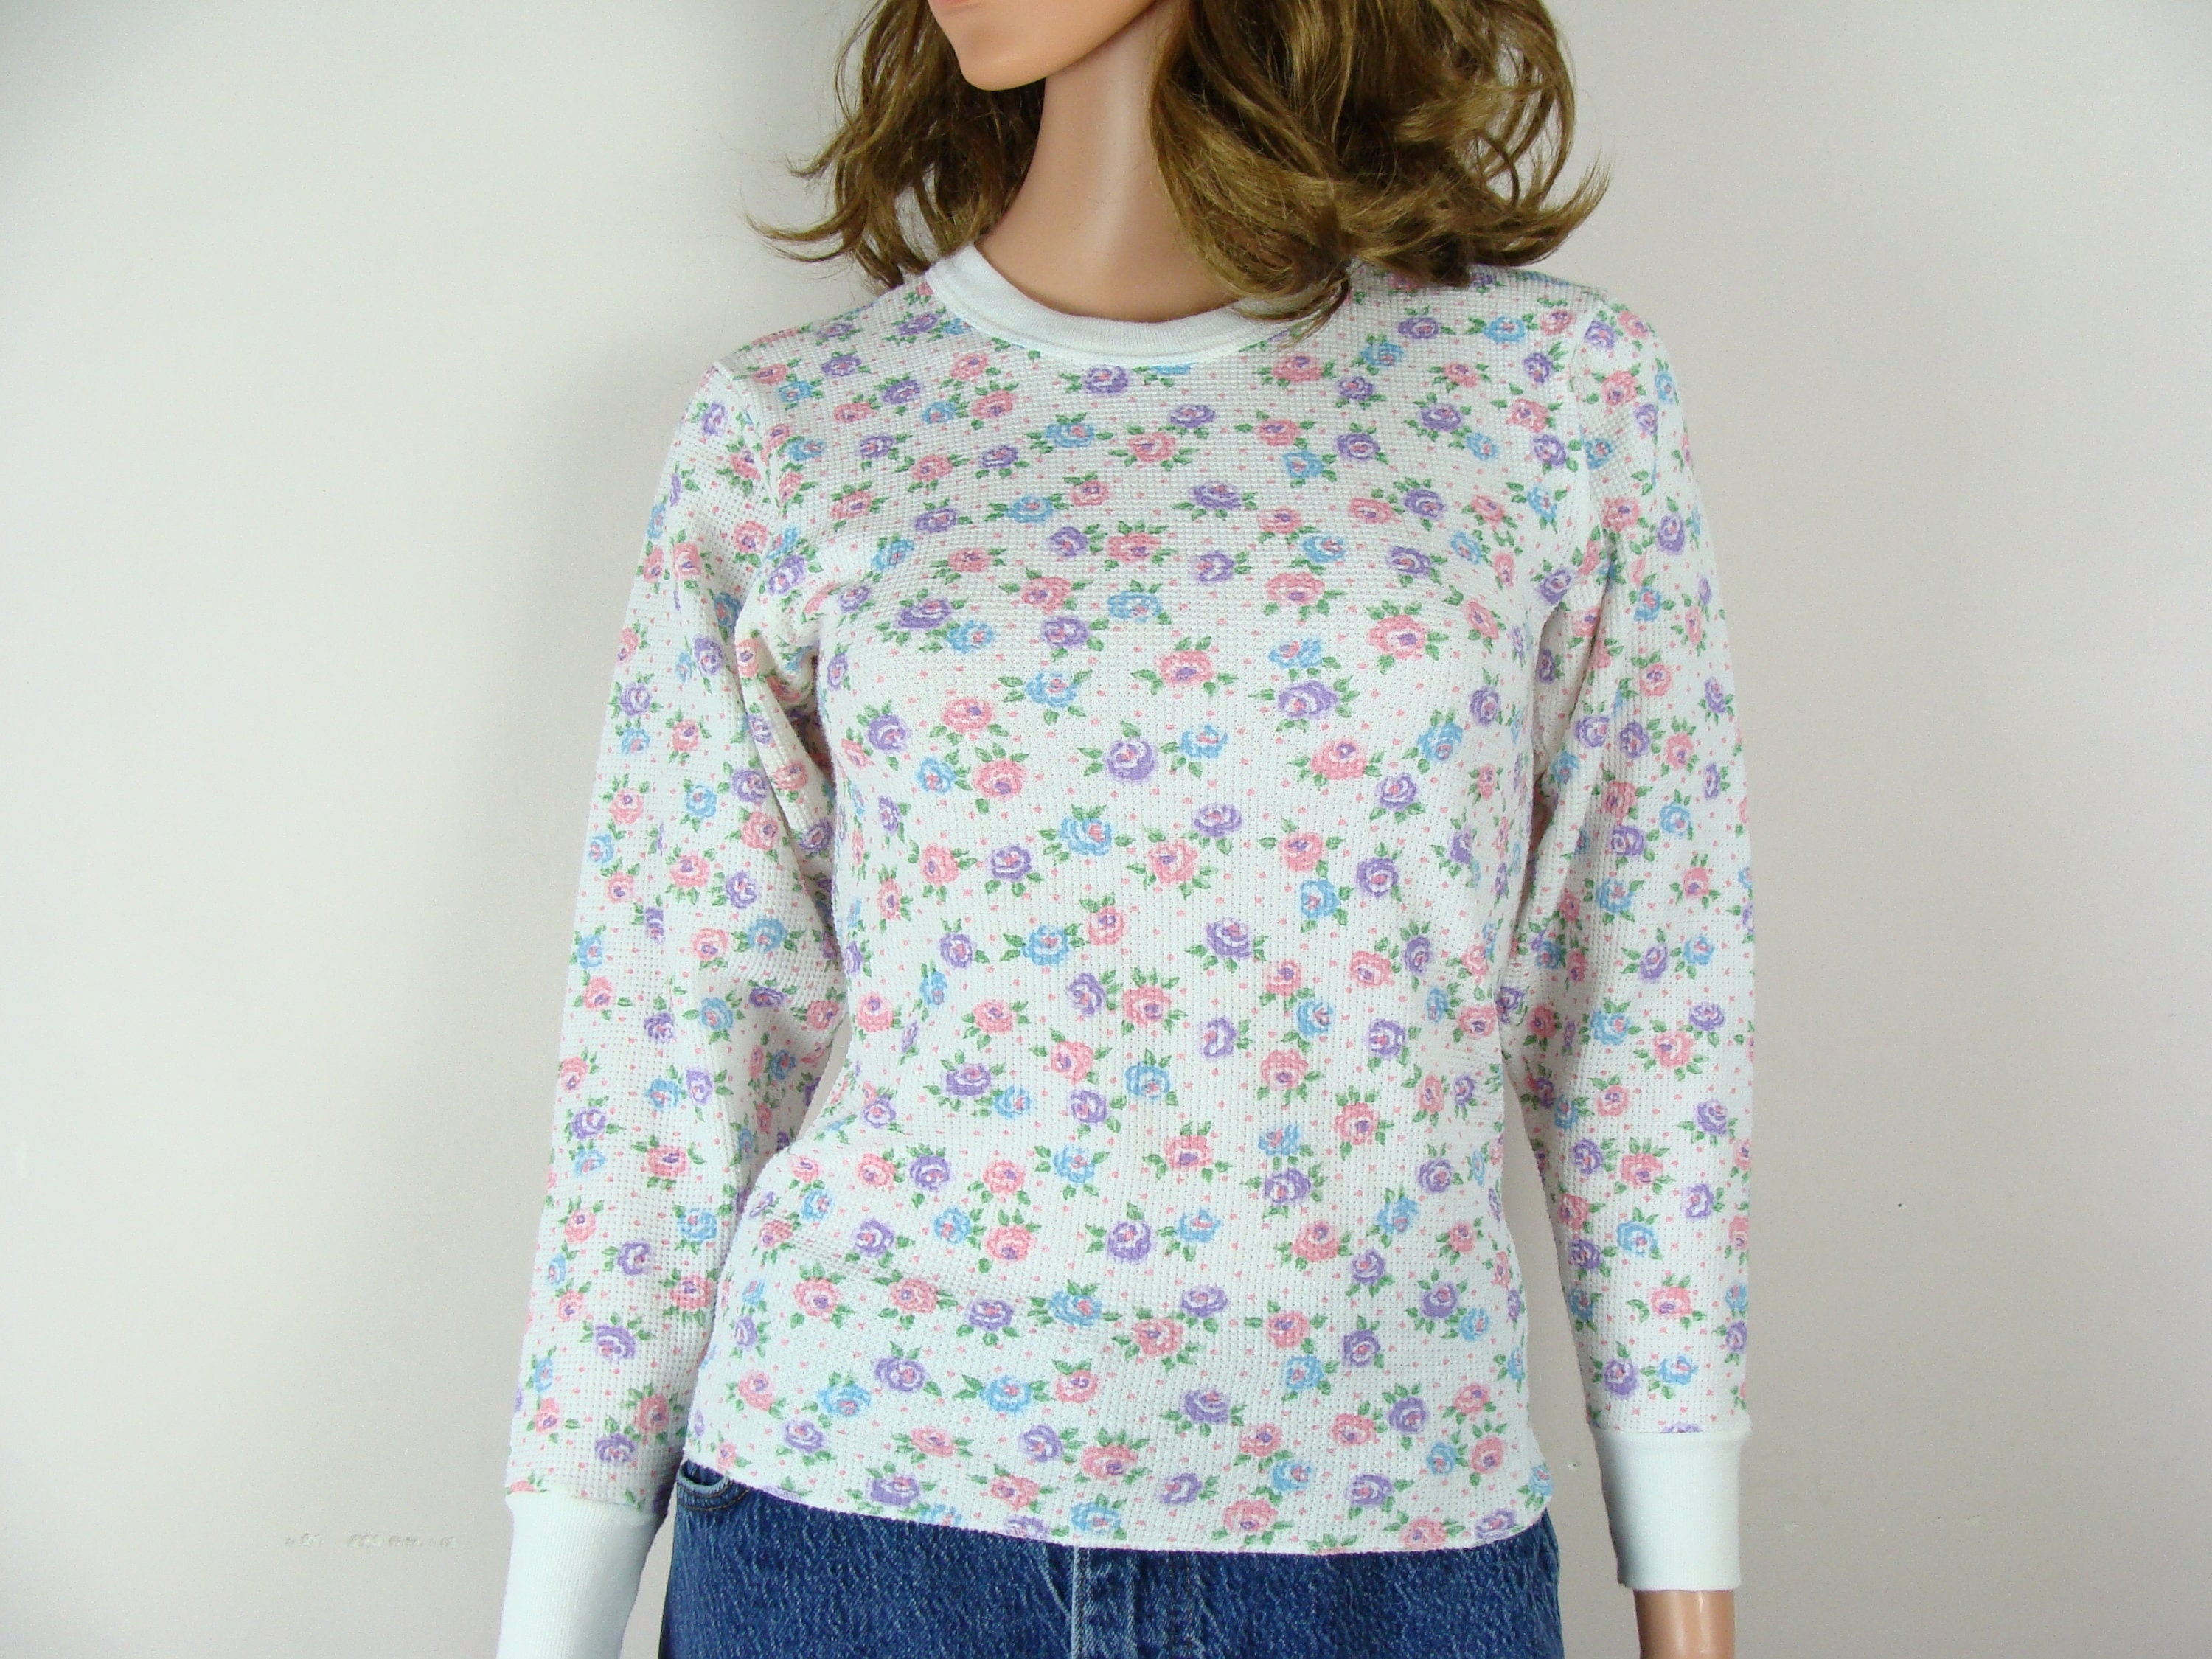 Vintage Thermal Shirt 80s Floral Print Waffle Knit Long Sleeve Top 90s  Comfy Club Made in USA Girl's Size 14 / 16 Polka Dot Pastel Pretty